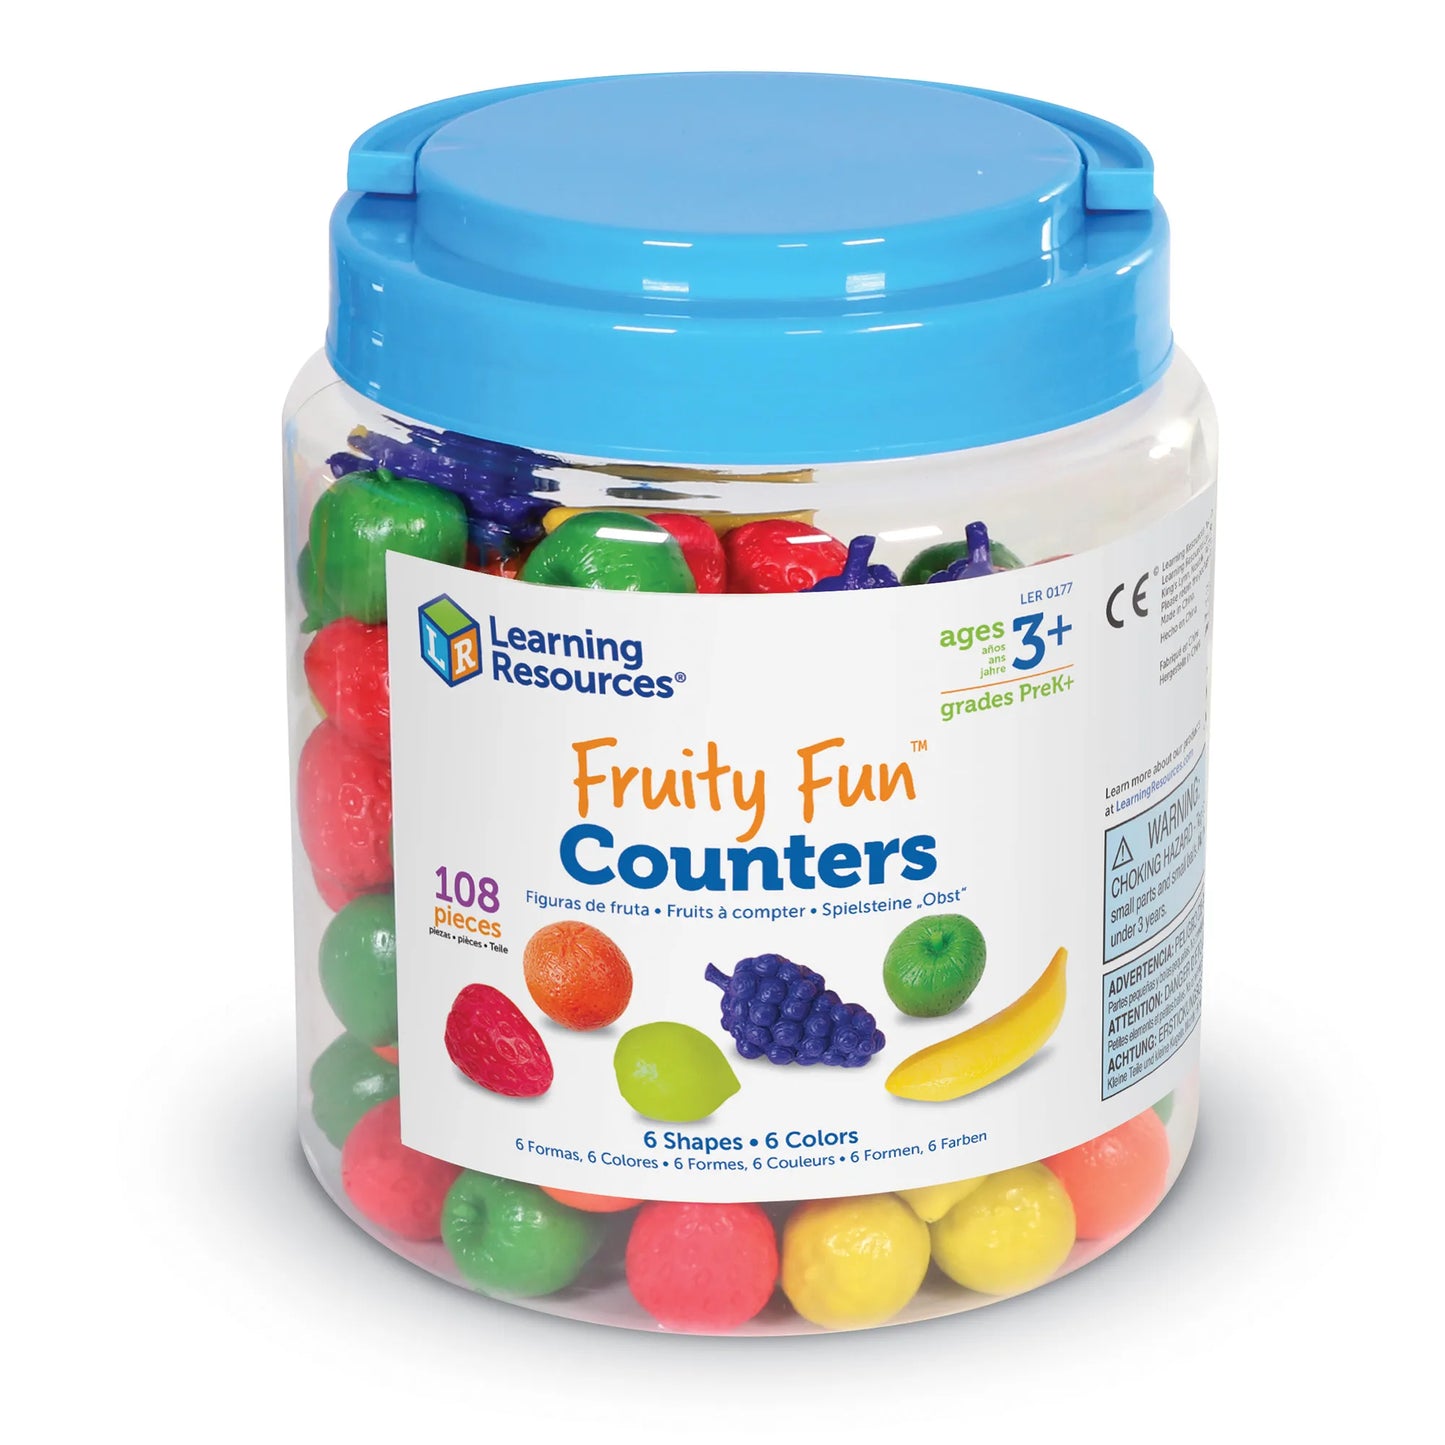 Learning Resources Fruity Fun Counters Set of 108